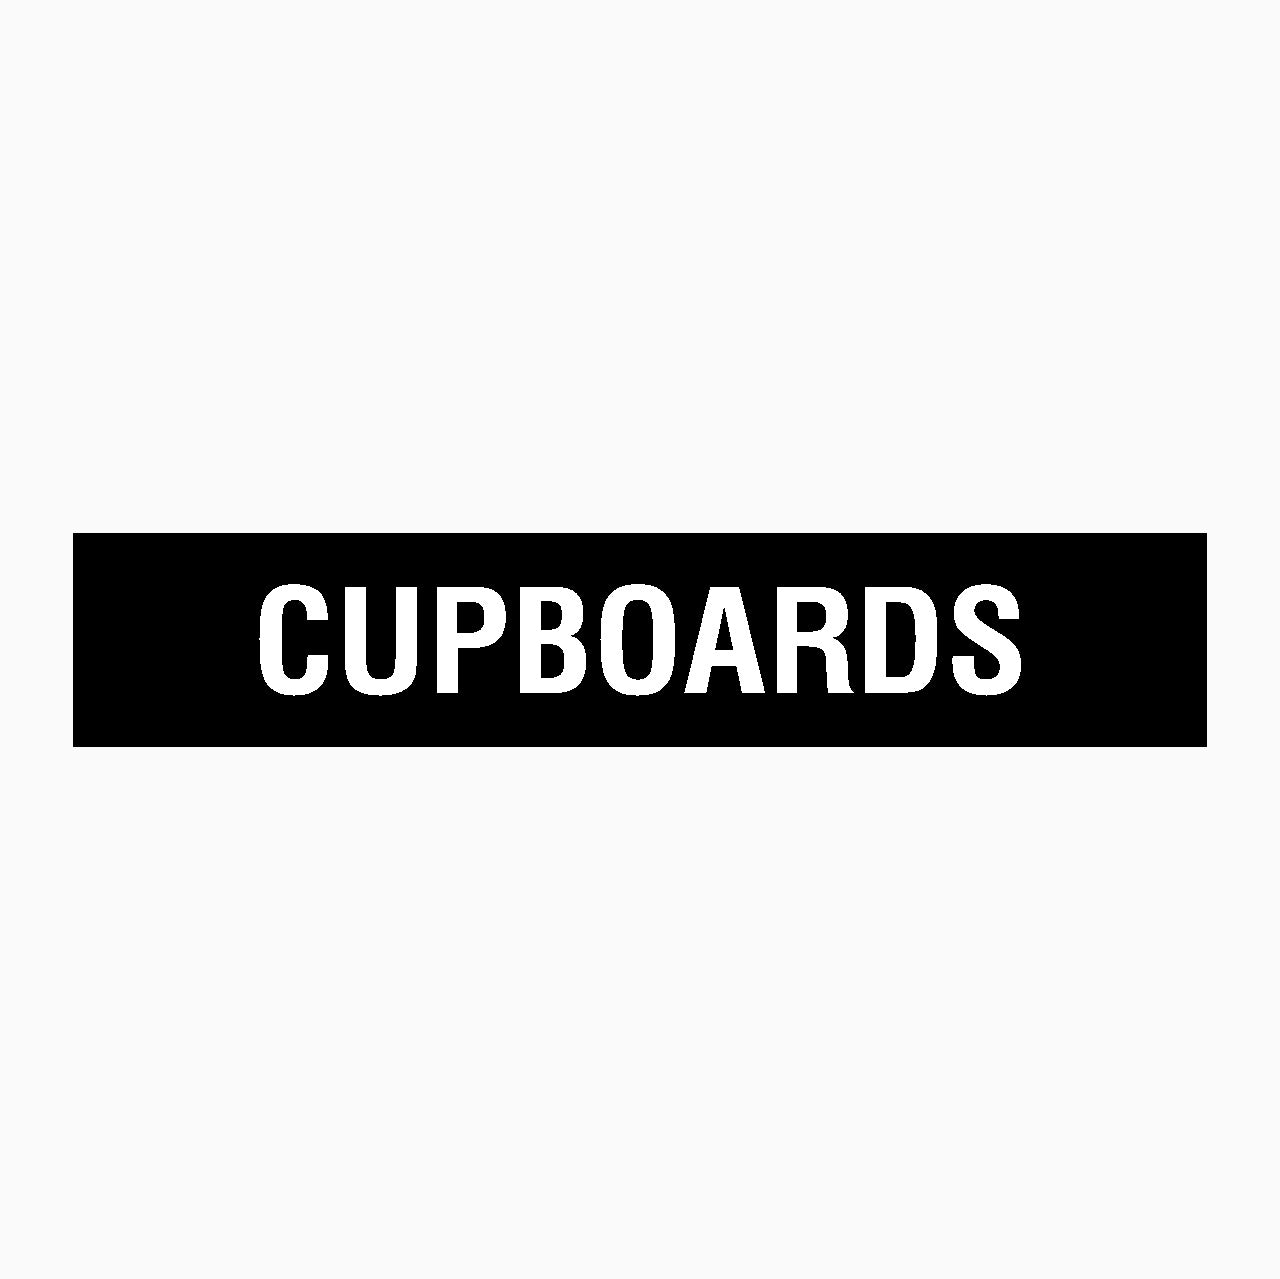 CUPBOARDS SIGN